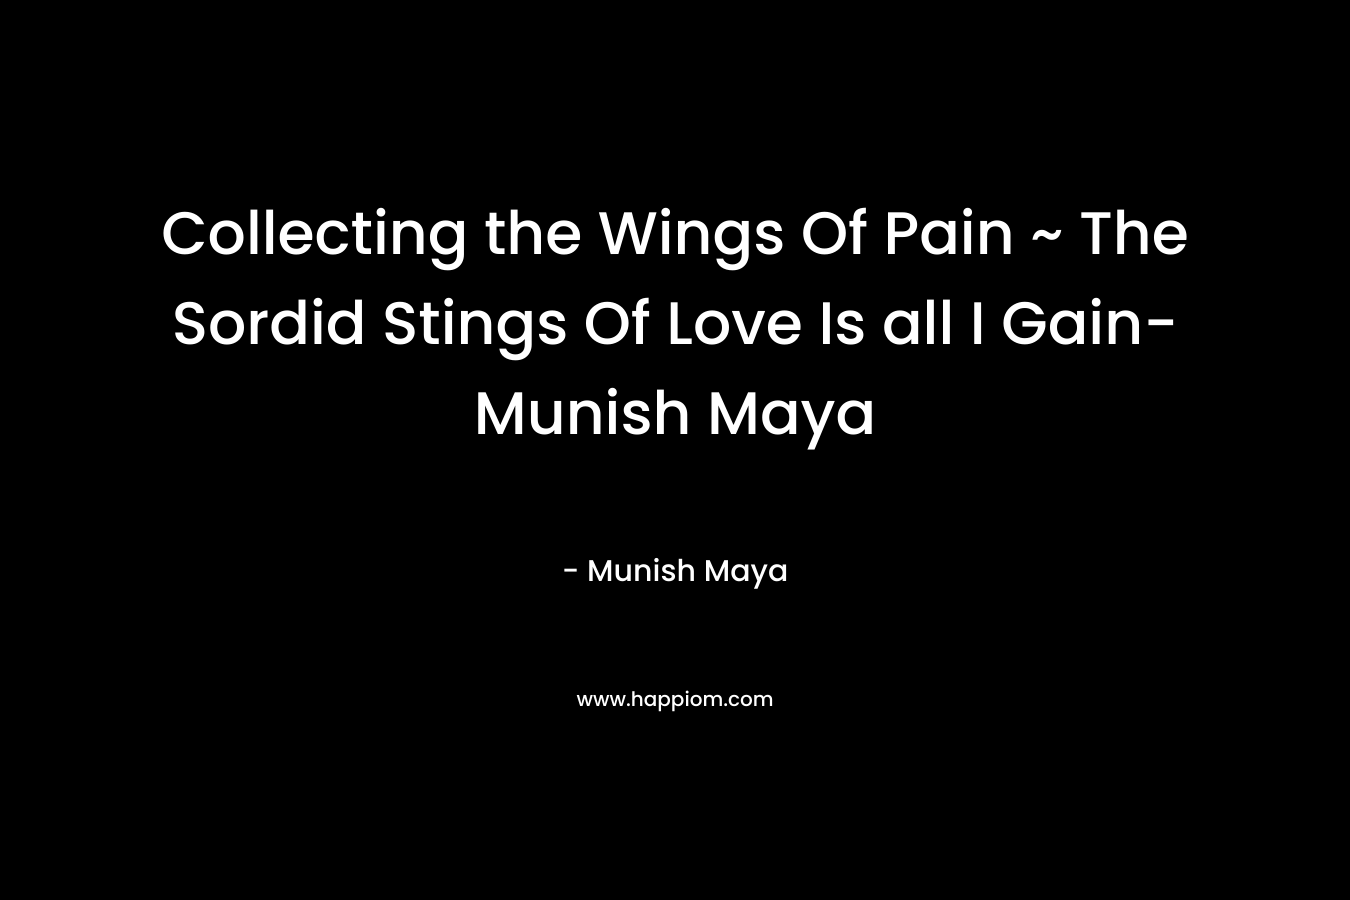 Collecting the Wings Of Pain ~ The Sordid Stings Of Love Is all I Gain- Munish Maya